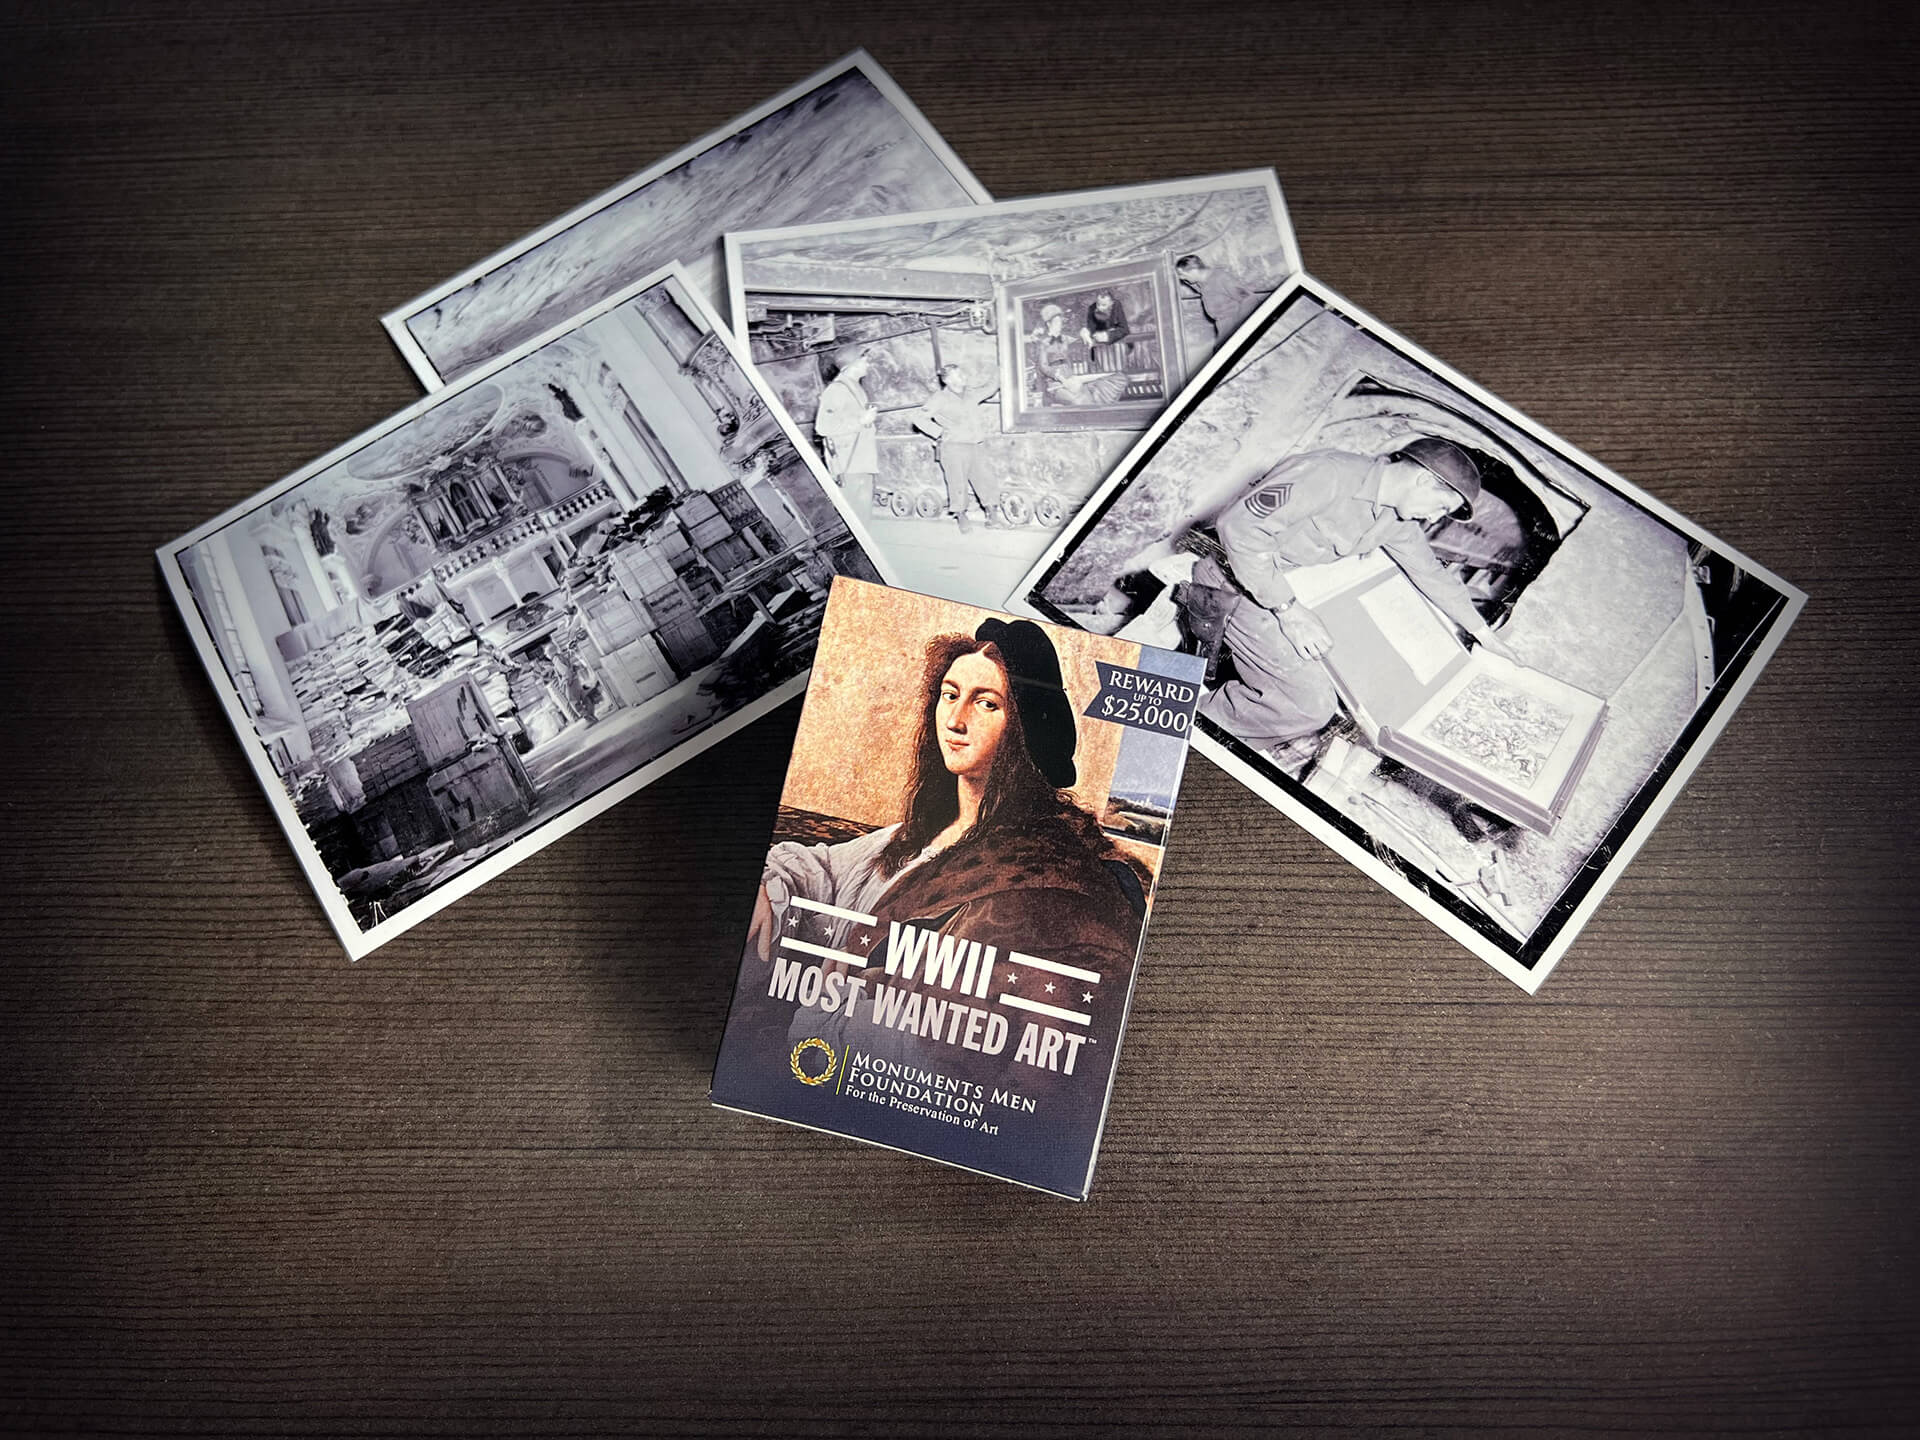 WWII Most Wanted Art™ — Playing cards by the Monuments Men Foundation